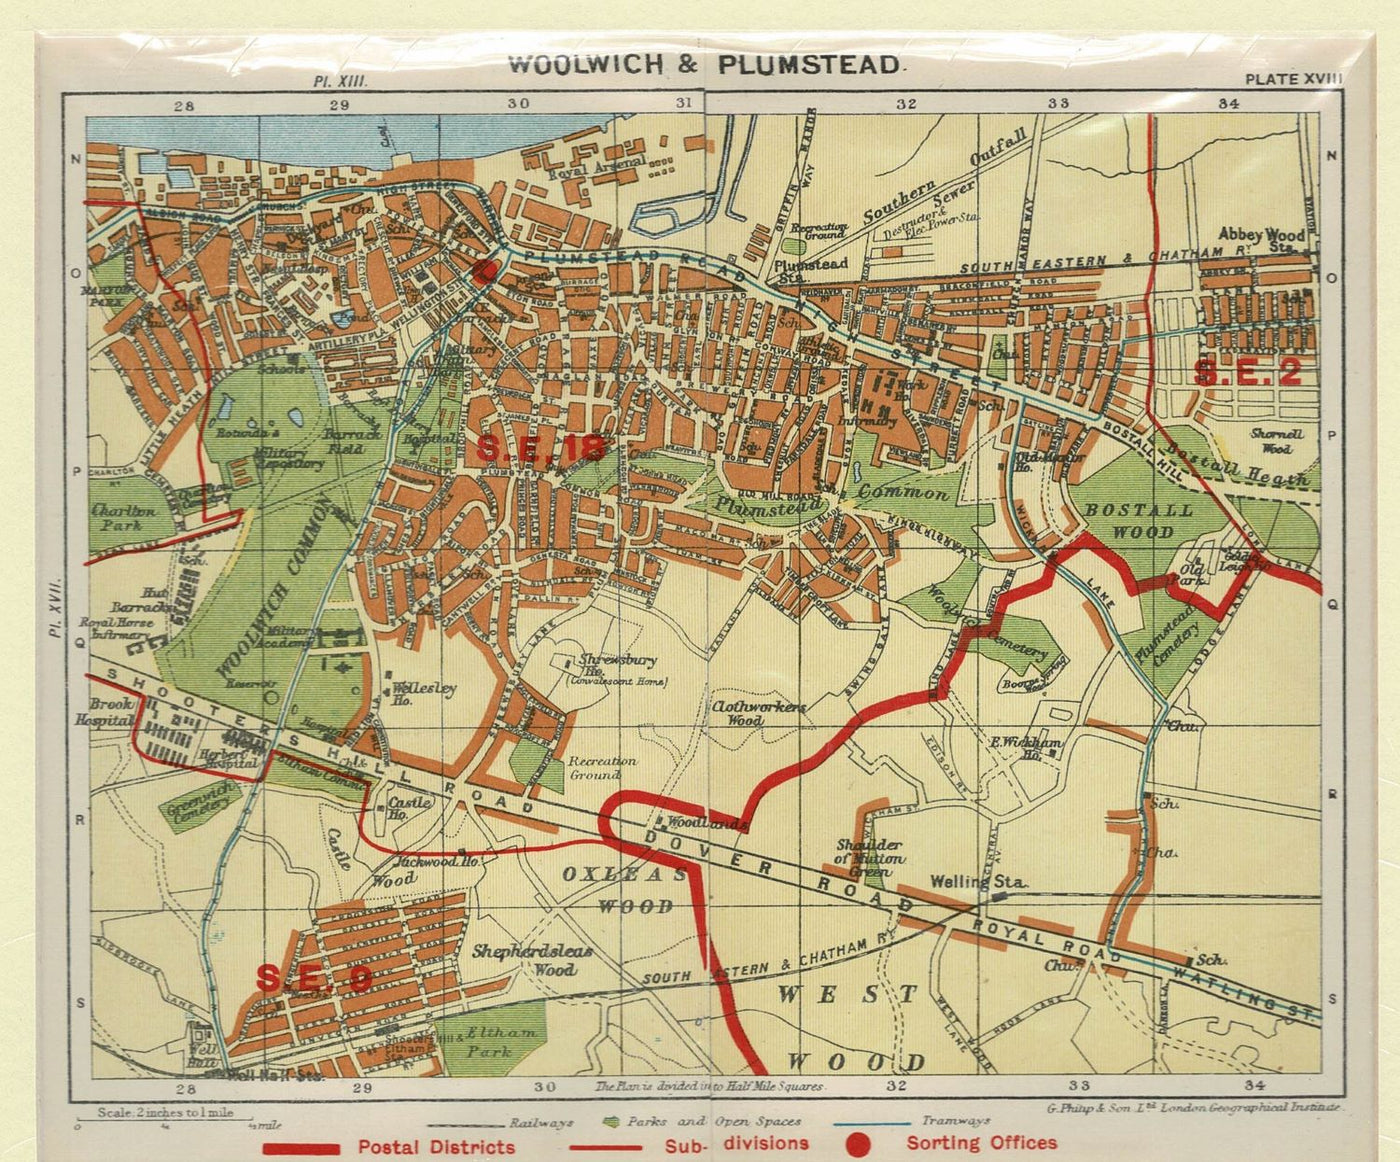 Woolwich and Plumstead, Antique Map, 1930